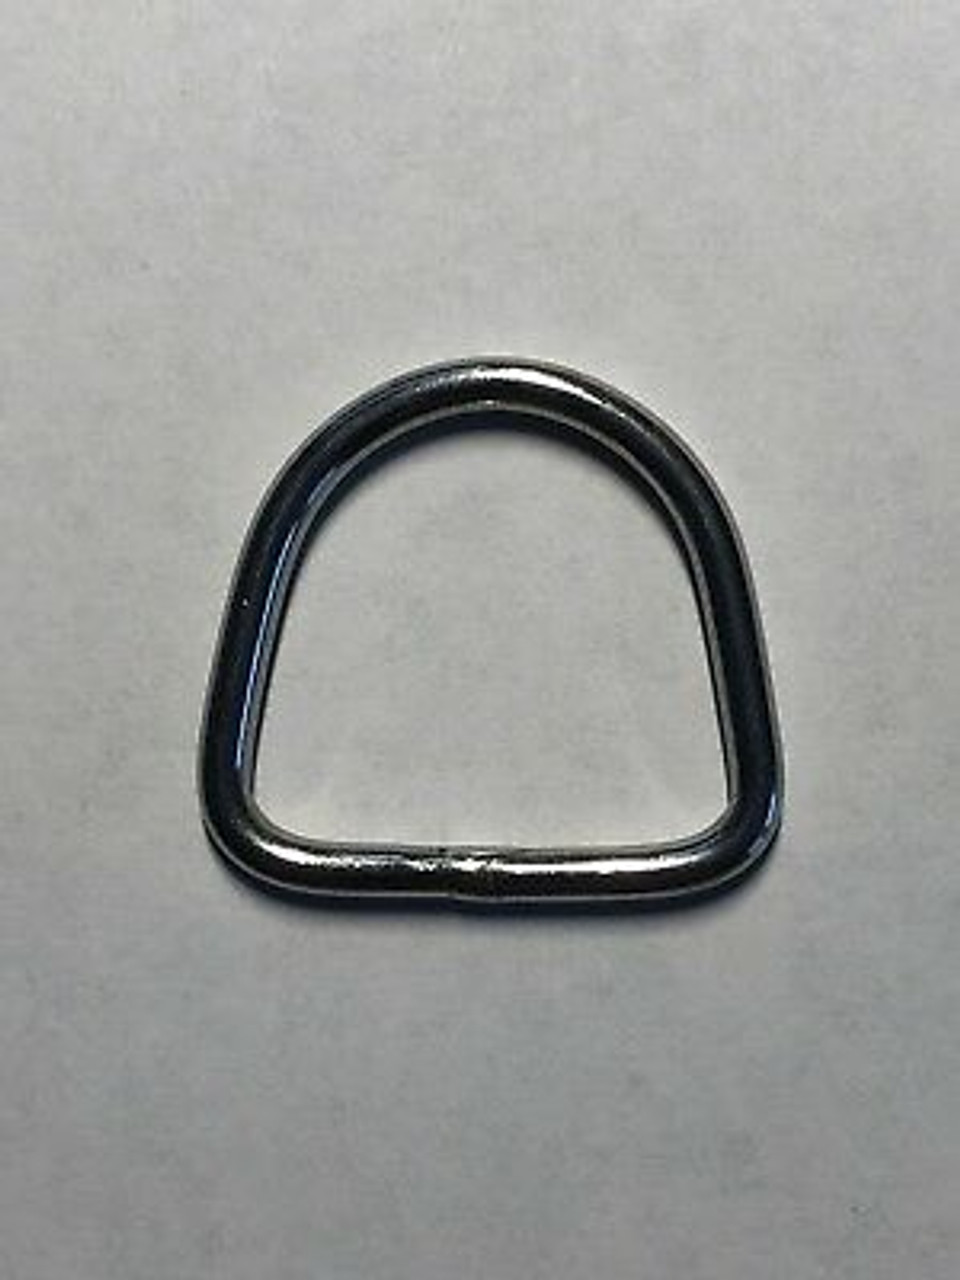 Stainless Steel 316 D Ring 1/8 x 1 (3mm x 25mm) Marine Grade